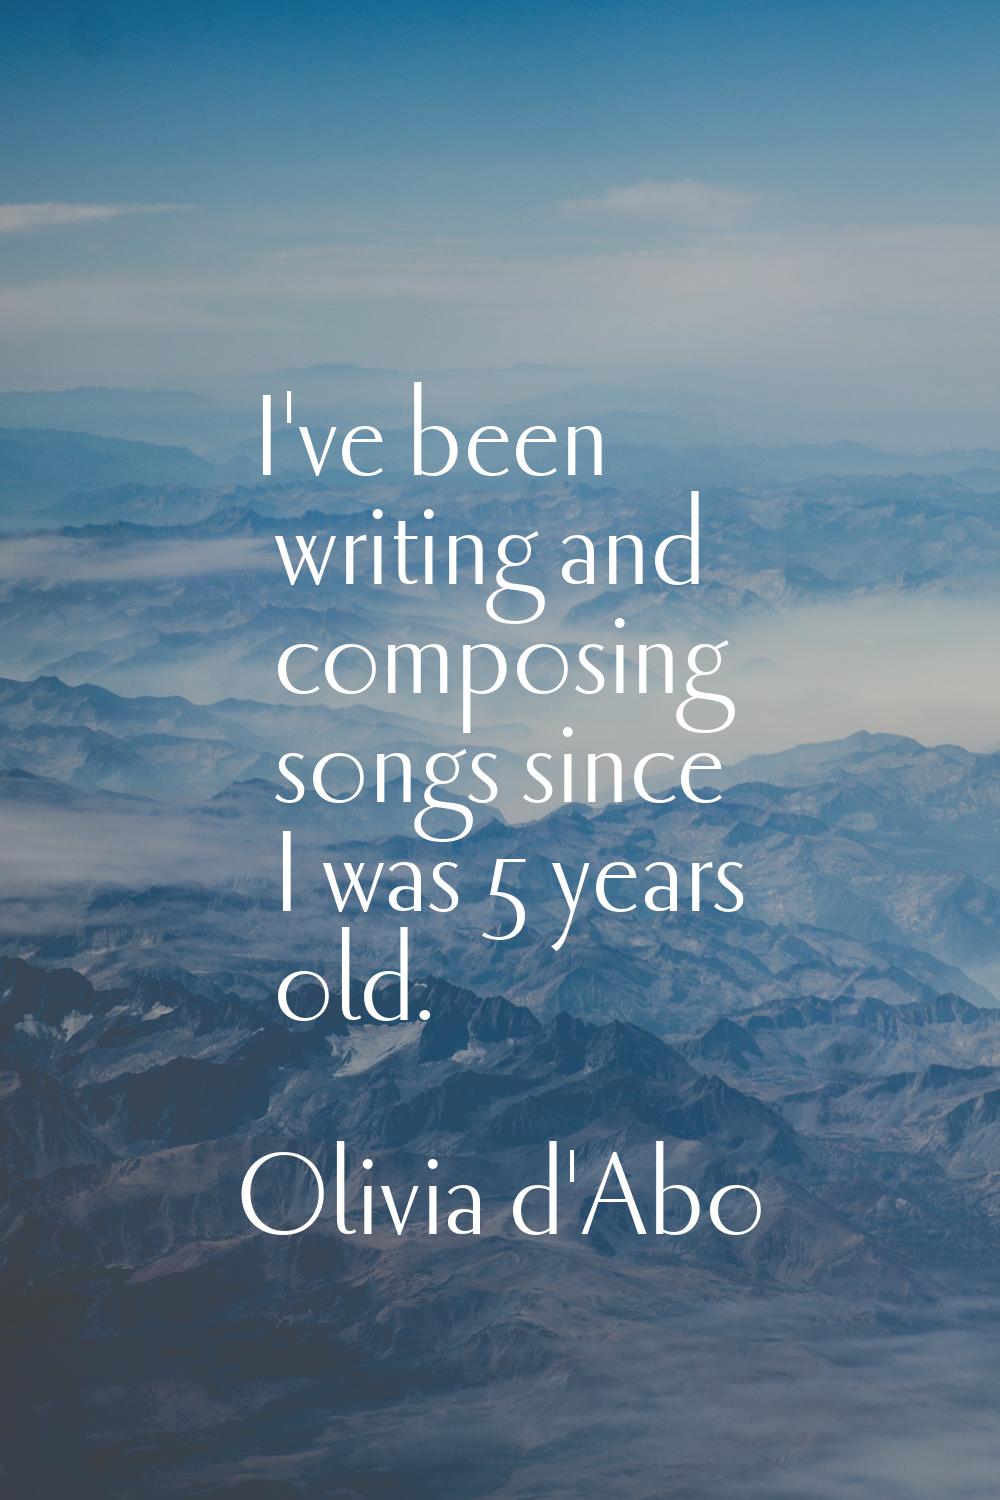 I've been writing and composing songs since I was 5 years old.